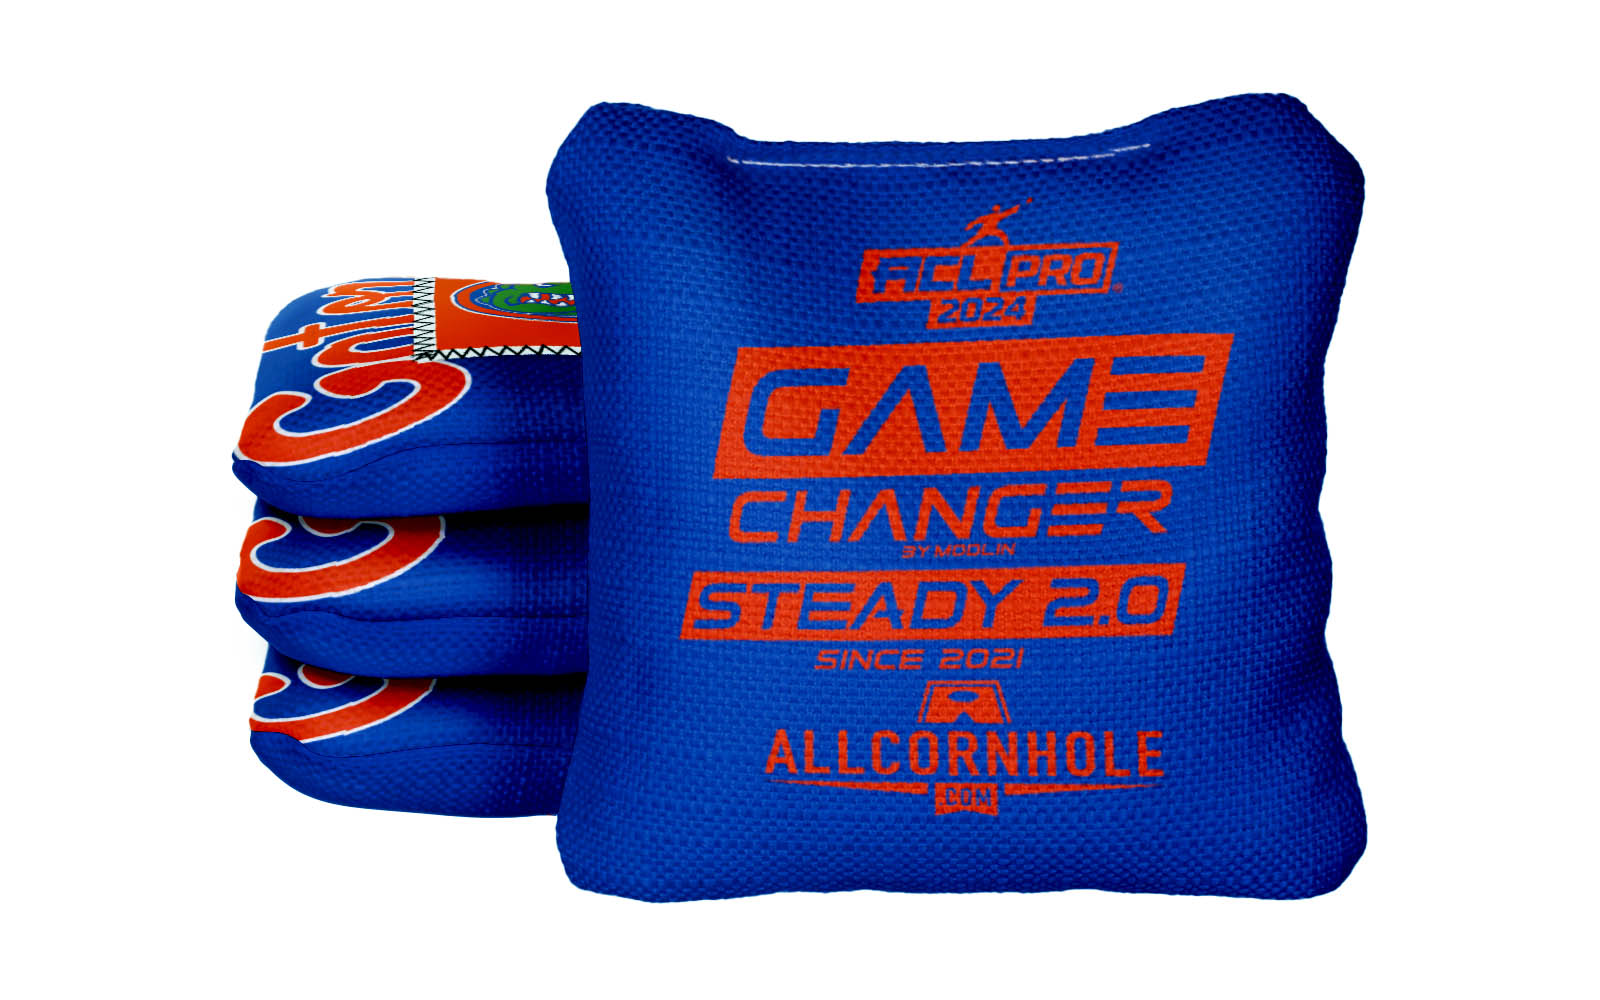 Officially Licensed Collegiate Cornhole Bags - AllCornhole Game Changers Steady 2.0 - Set of 4 - University of Florida